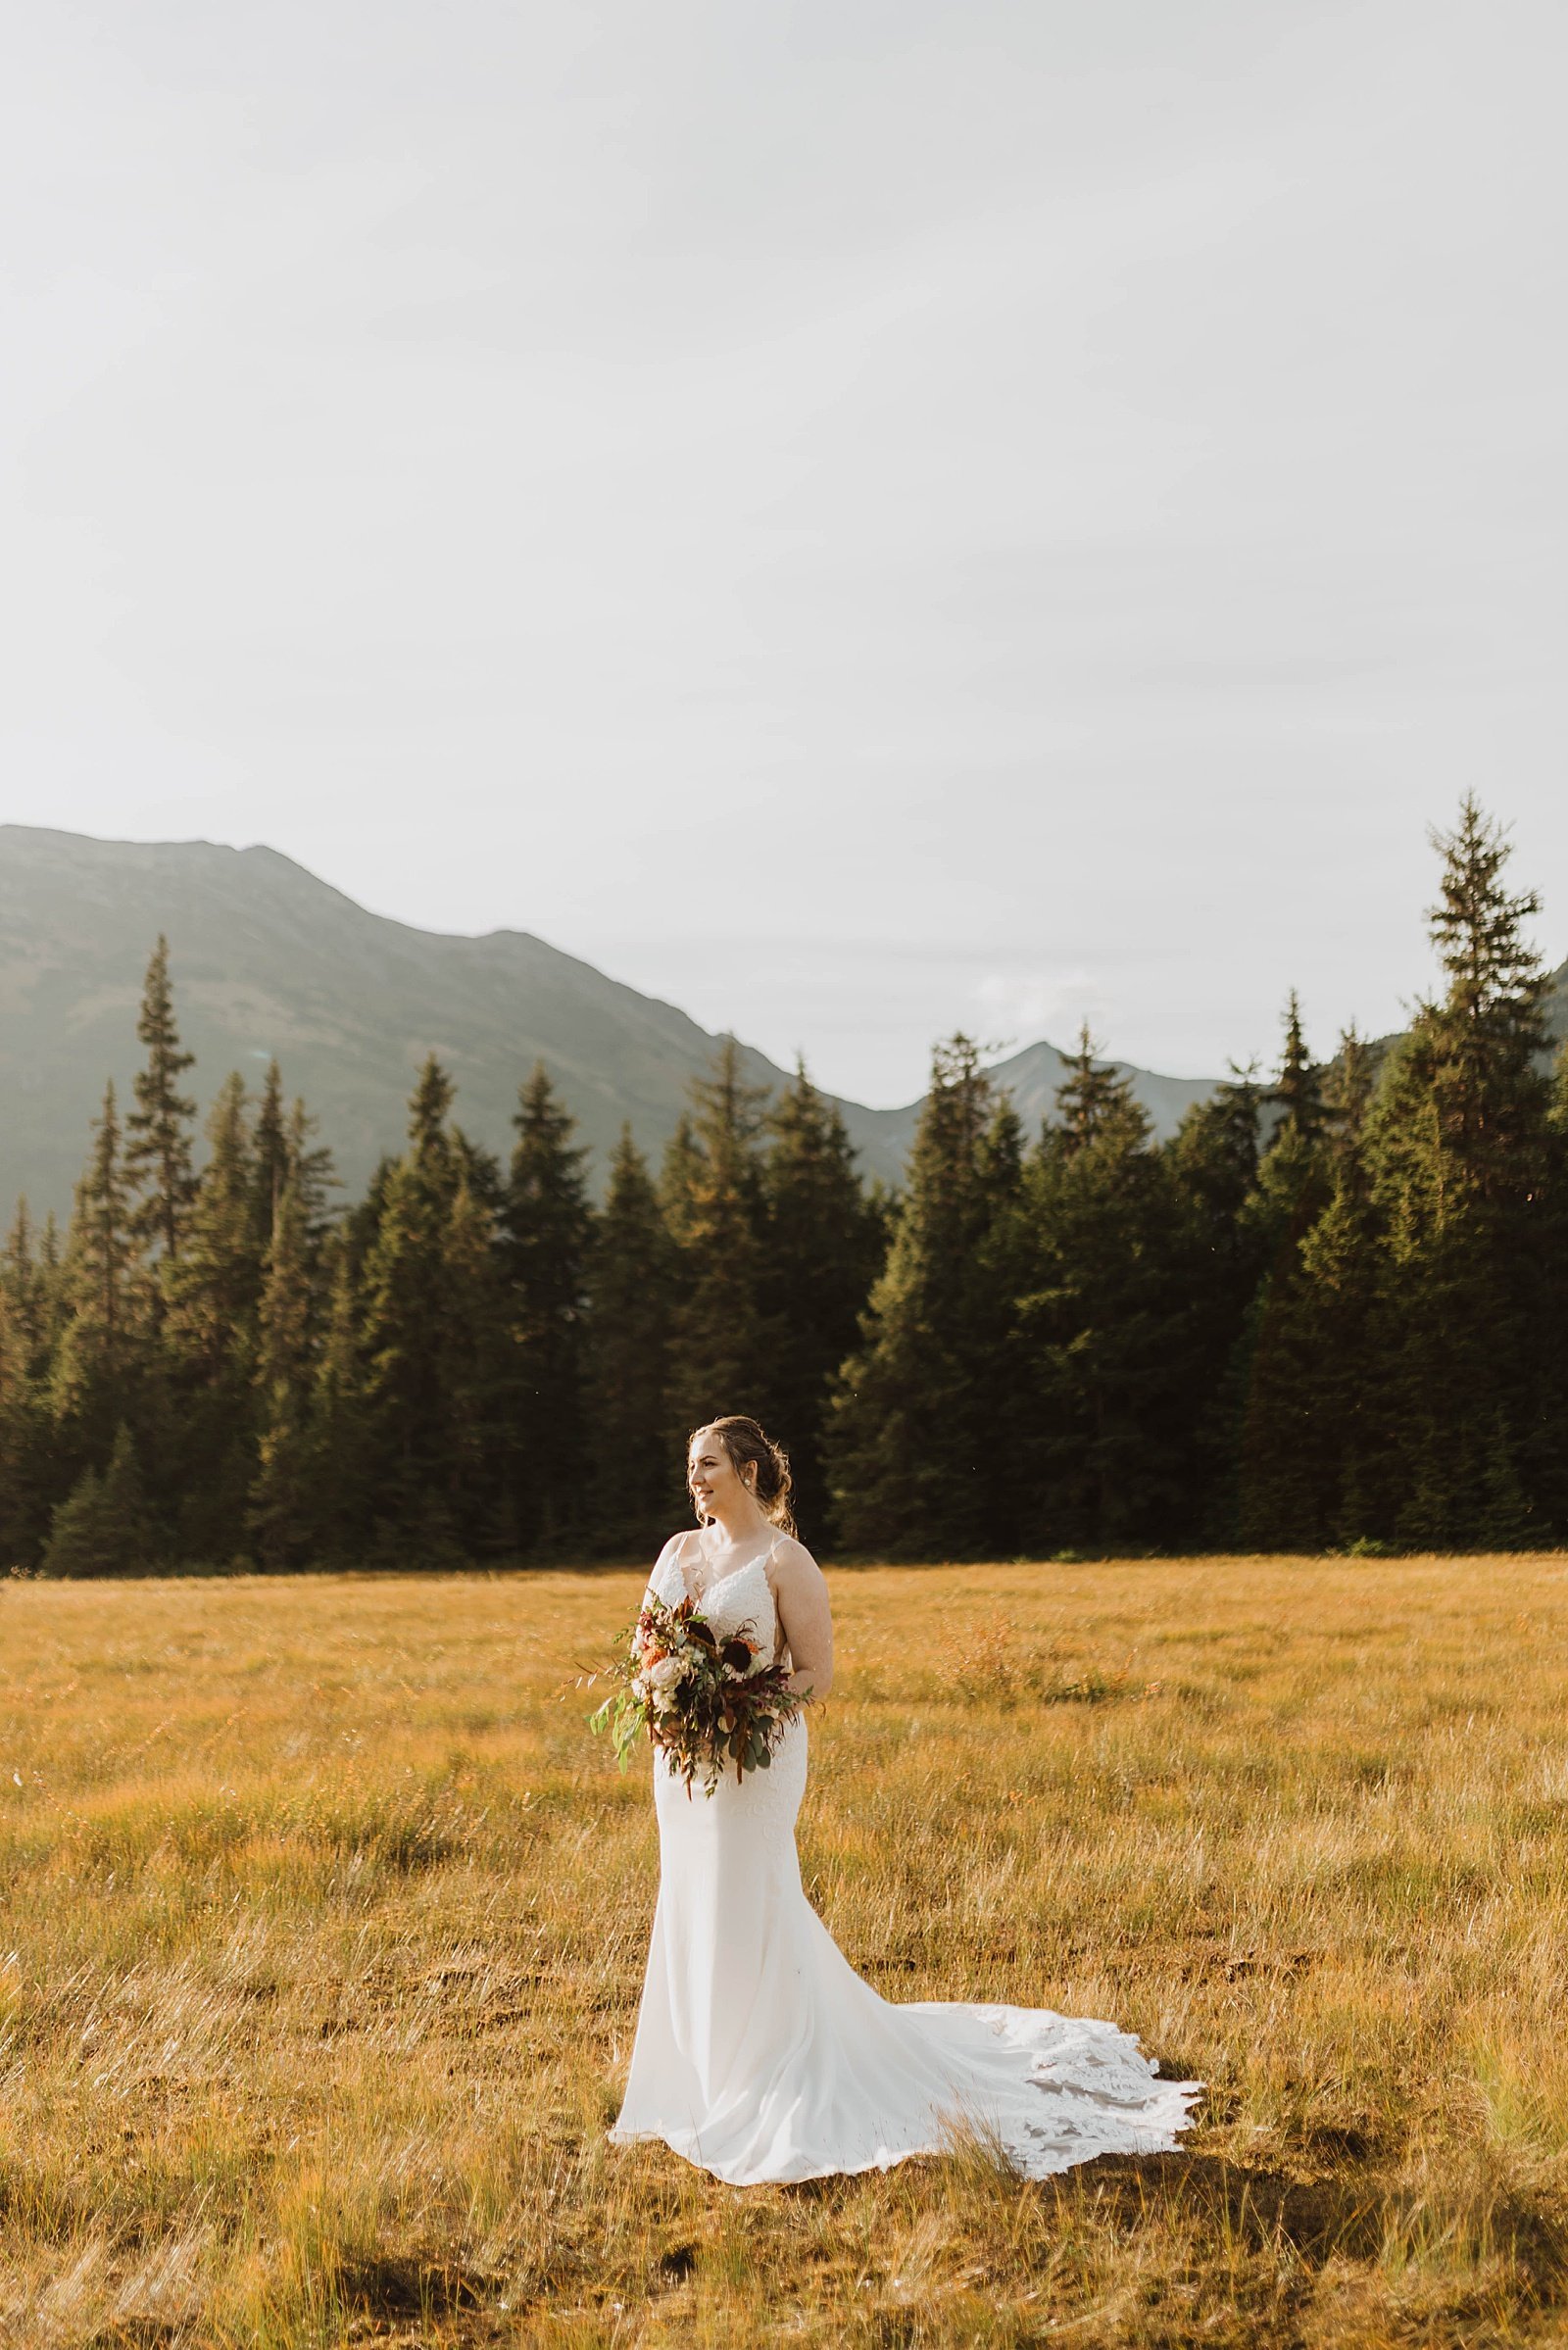  Summer bride in a field with mountains behind her 